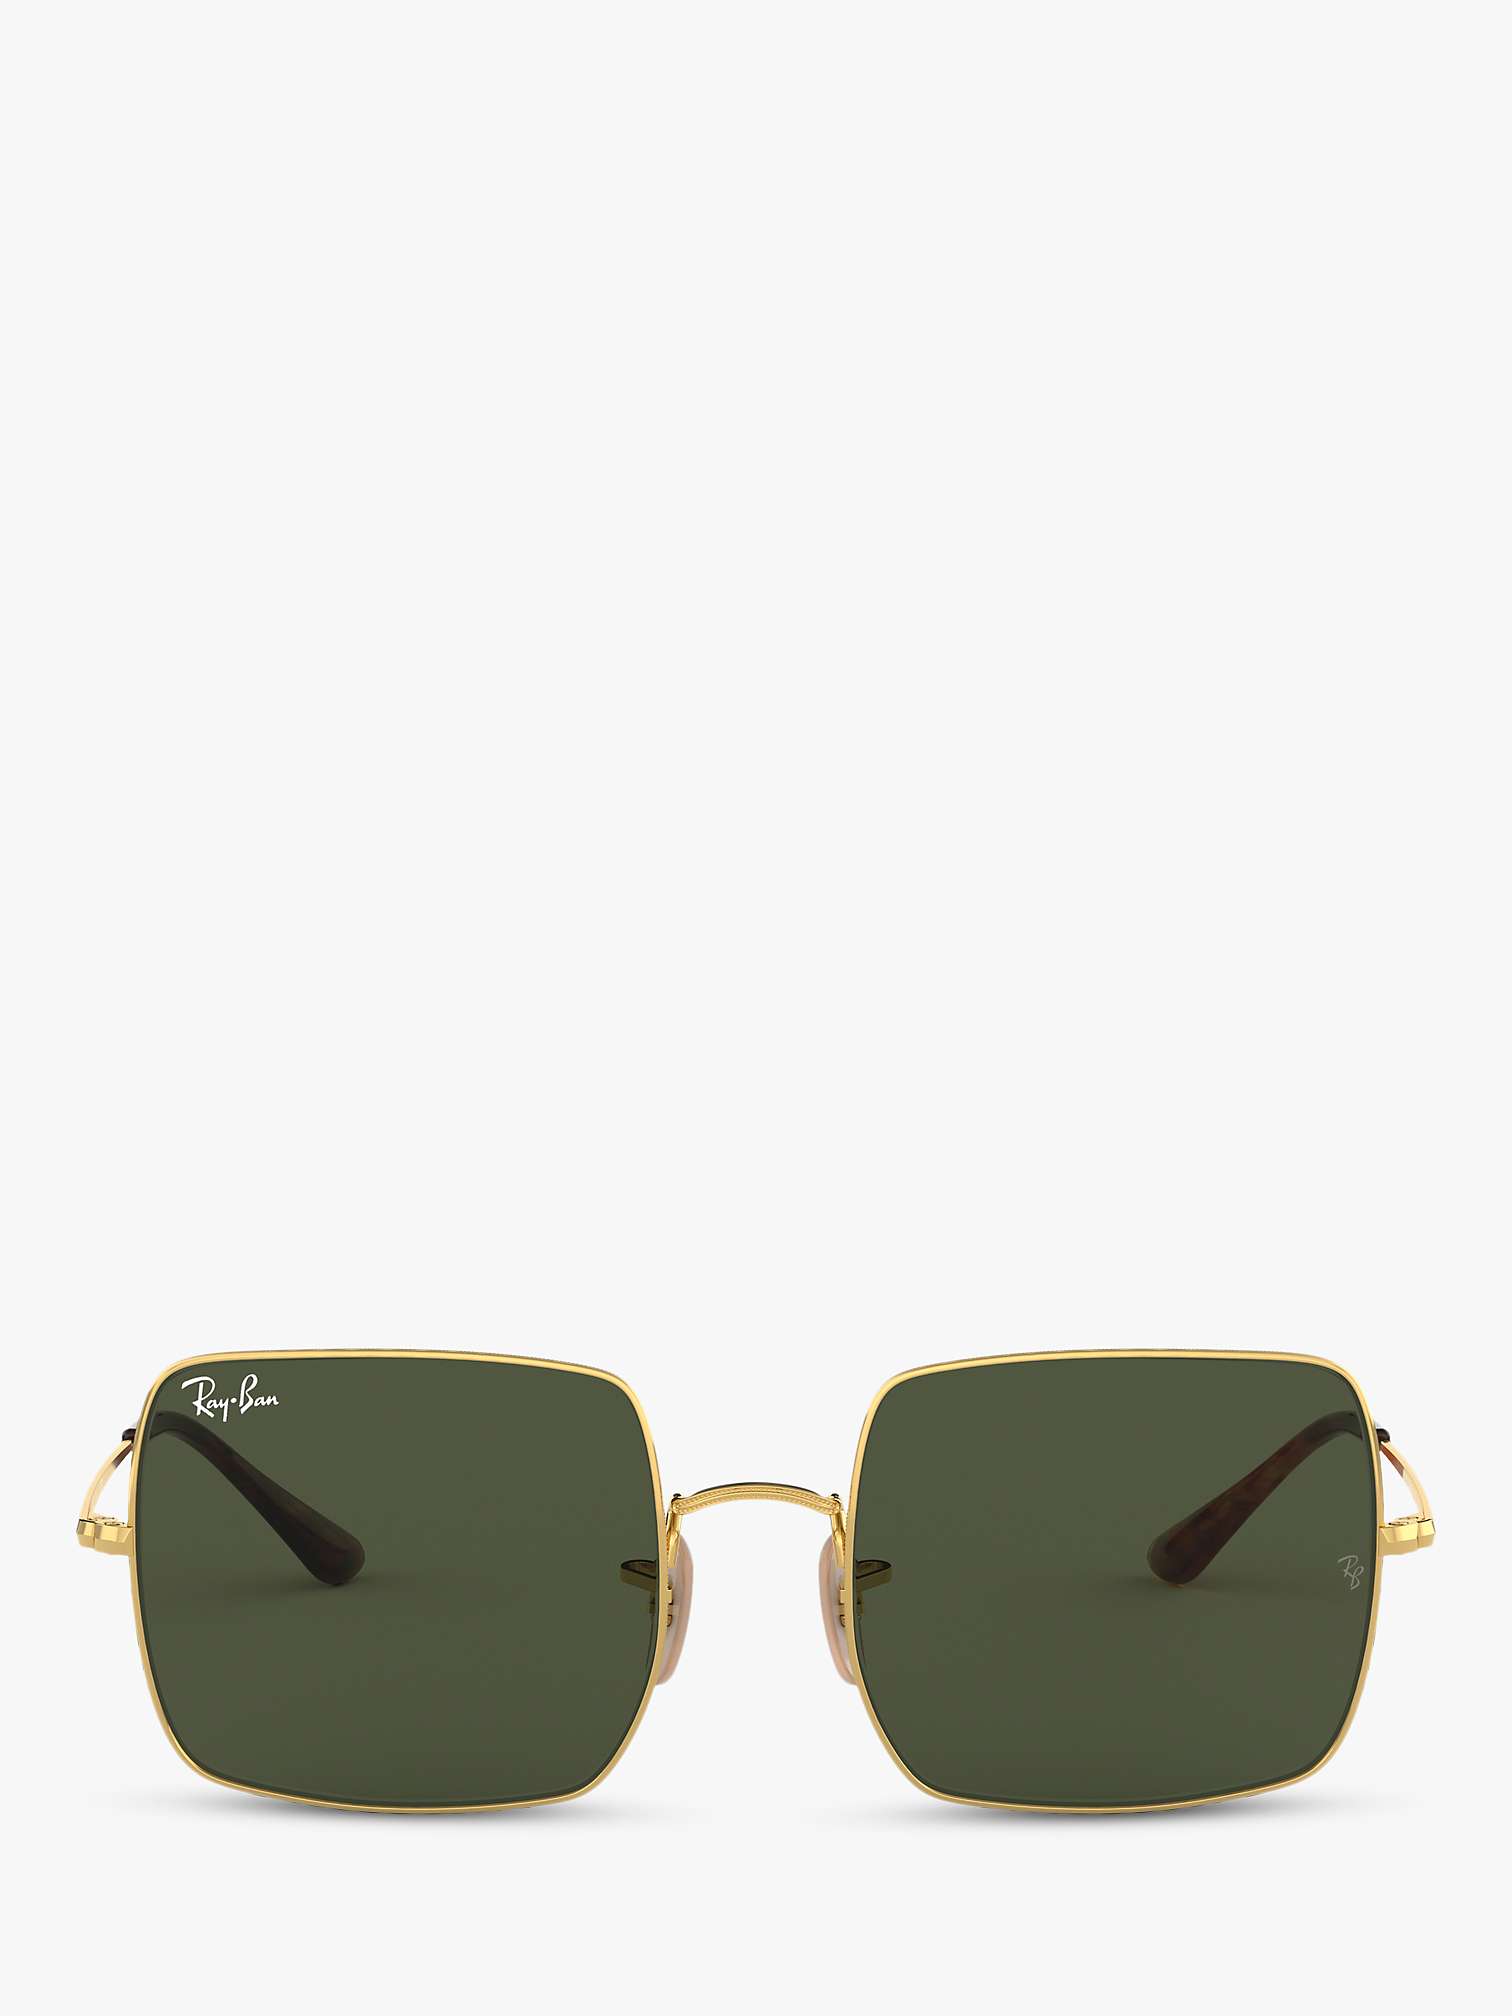 Buy Ray-Ban RB1971 Unisex Square Sunglasses, Gold/Green Online at johnlewis.com